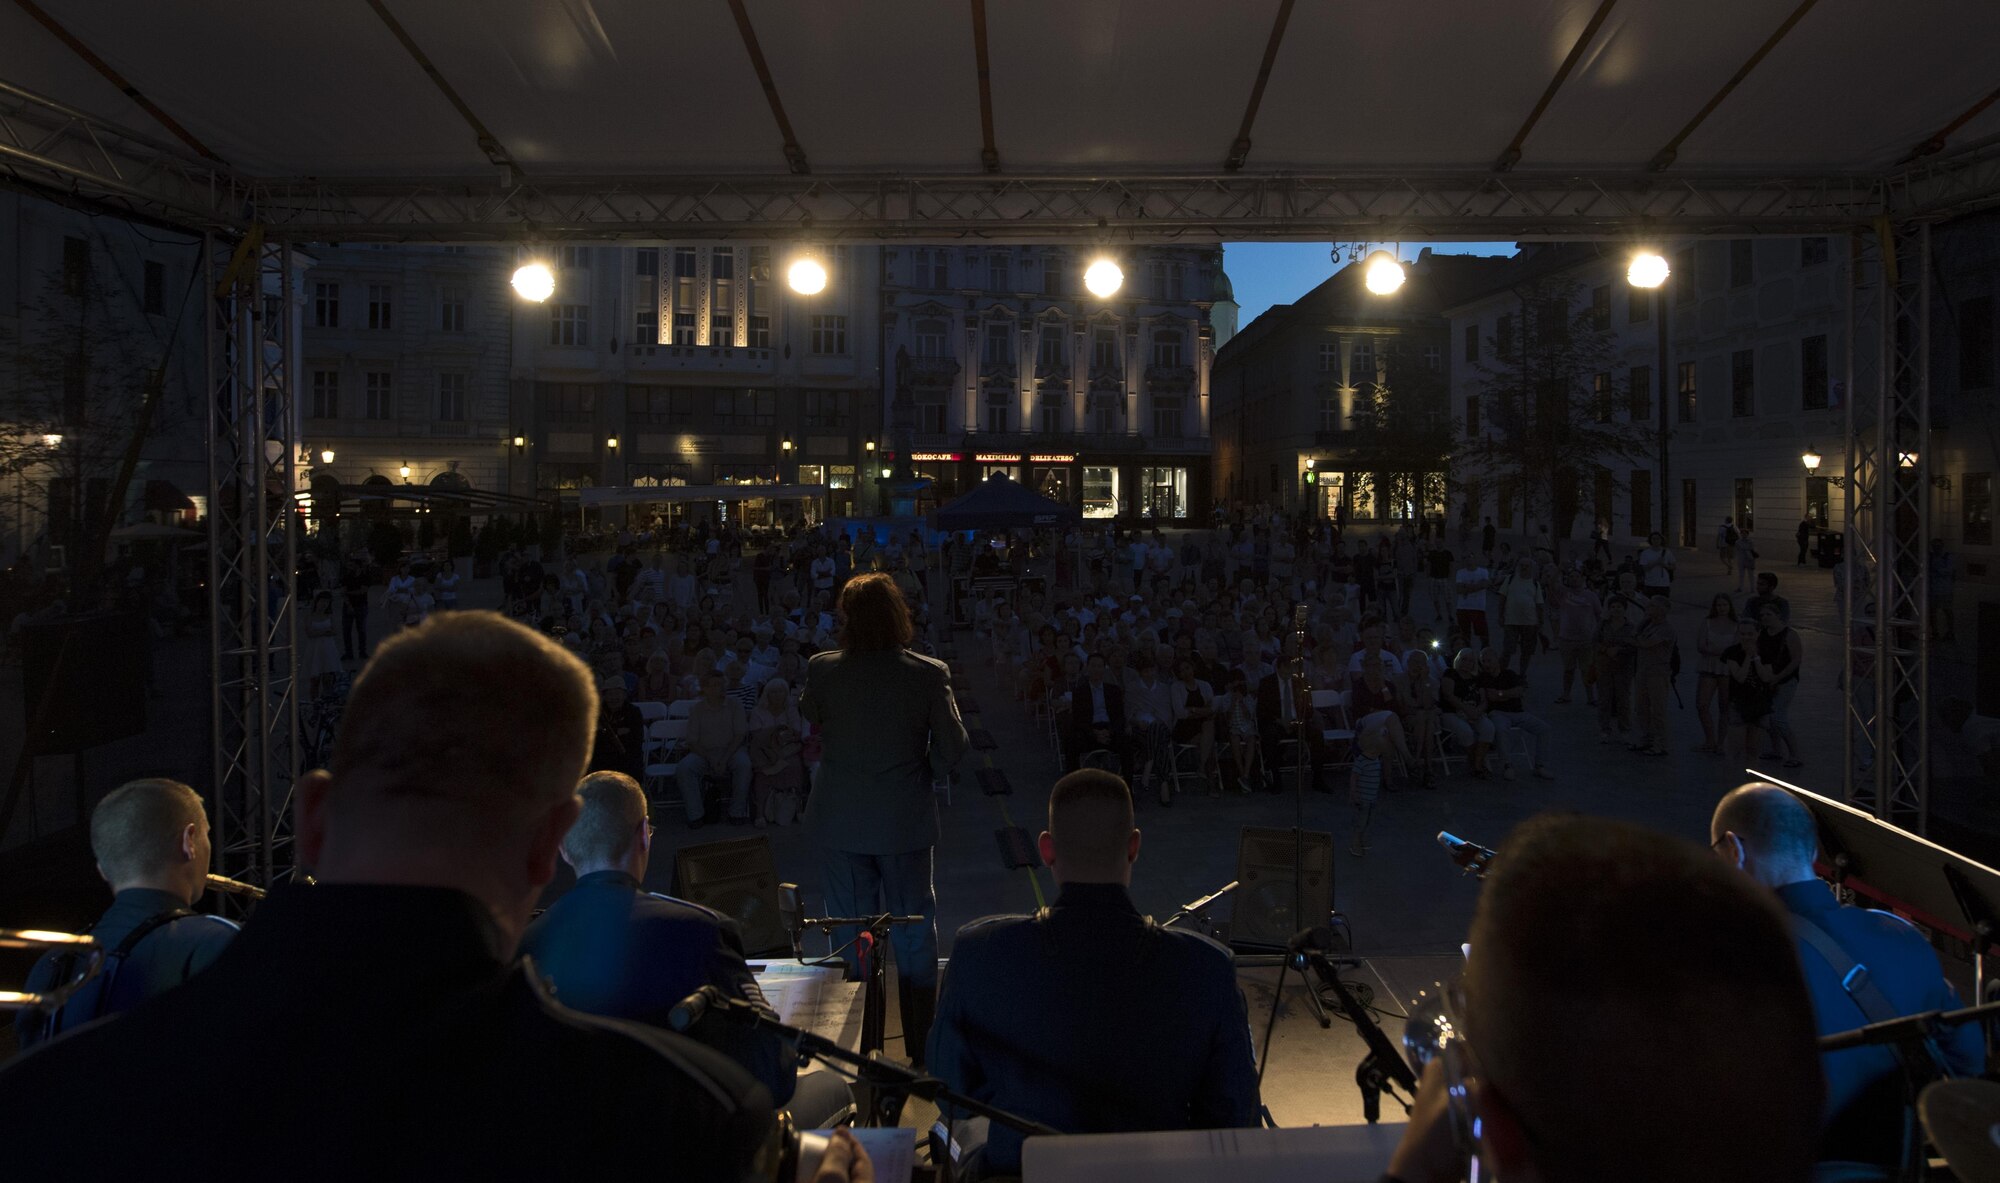 U.S. Air Force Master Sgt. Michele Harris, U.S. Air Forces in Europe vocalist, sings while other members of the band play instruments for the 73rd anniversary of the Slovak National Uprising in Bratislava, Slovakia, Aug. 30, 2017. The band was invited to perform for the event held at the Museum of Slovak National Uprising, as well as in the nation’s capital, Bratislava. The USAFE Band’s performance will help preserve the mutual commitment and trust between the U.S. and Slovakia. (U.S. Air Force photo by Senior Airman Tryphena Mayhugh)